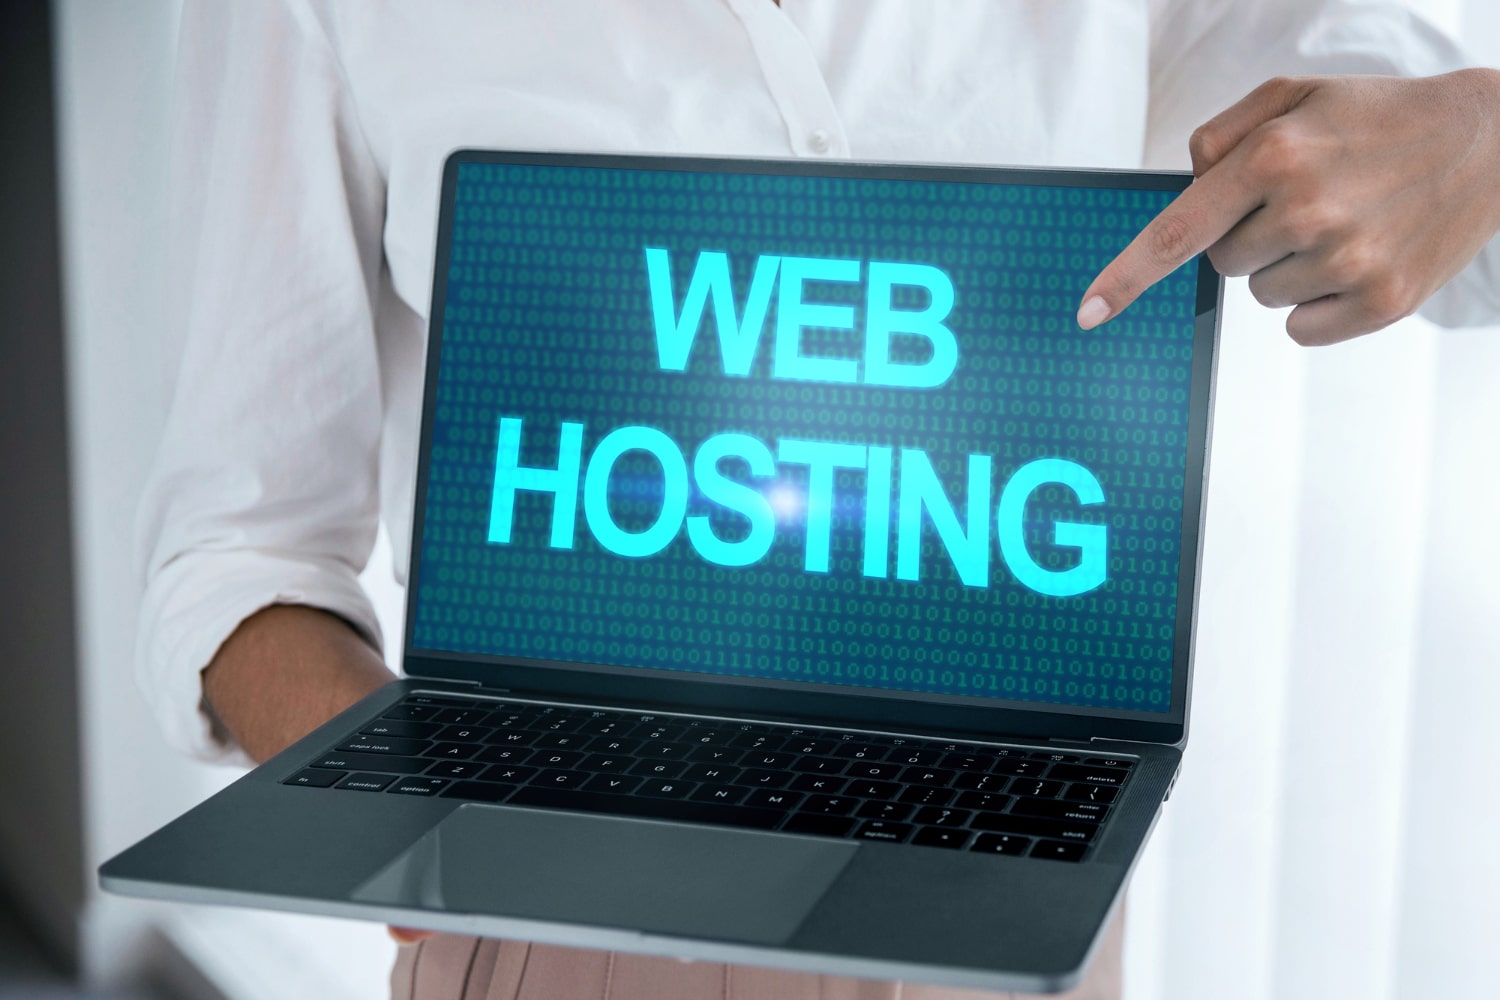 Build a Staging Site Using Your Web Host
